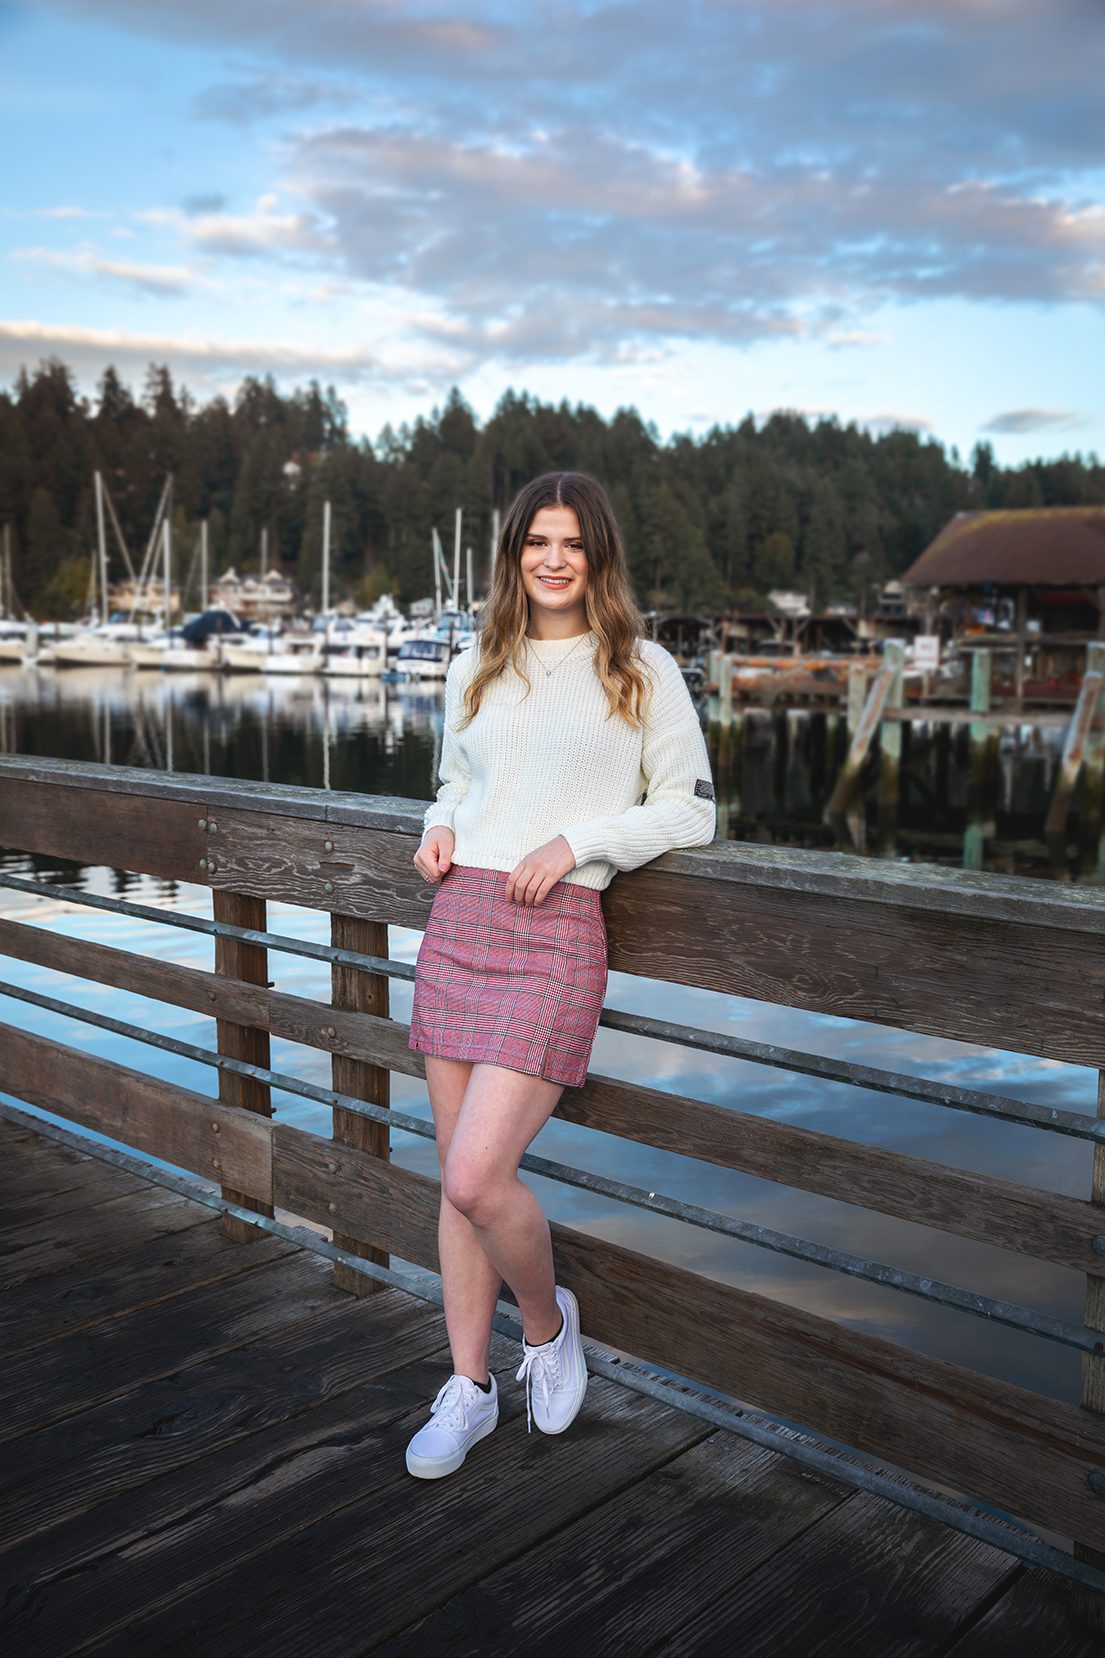 high school senior downtown gig harbor washington with boats in background